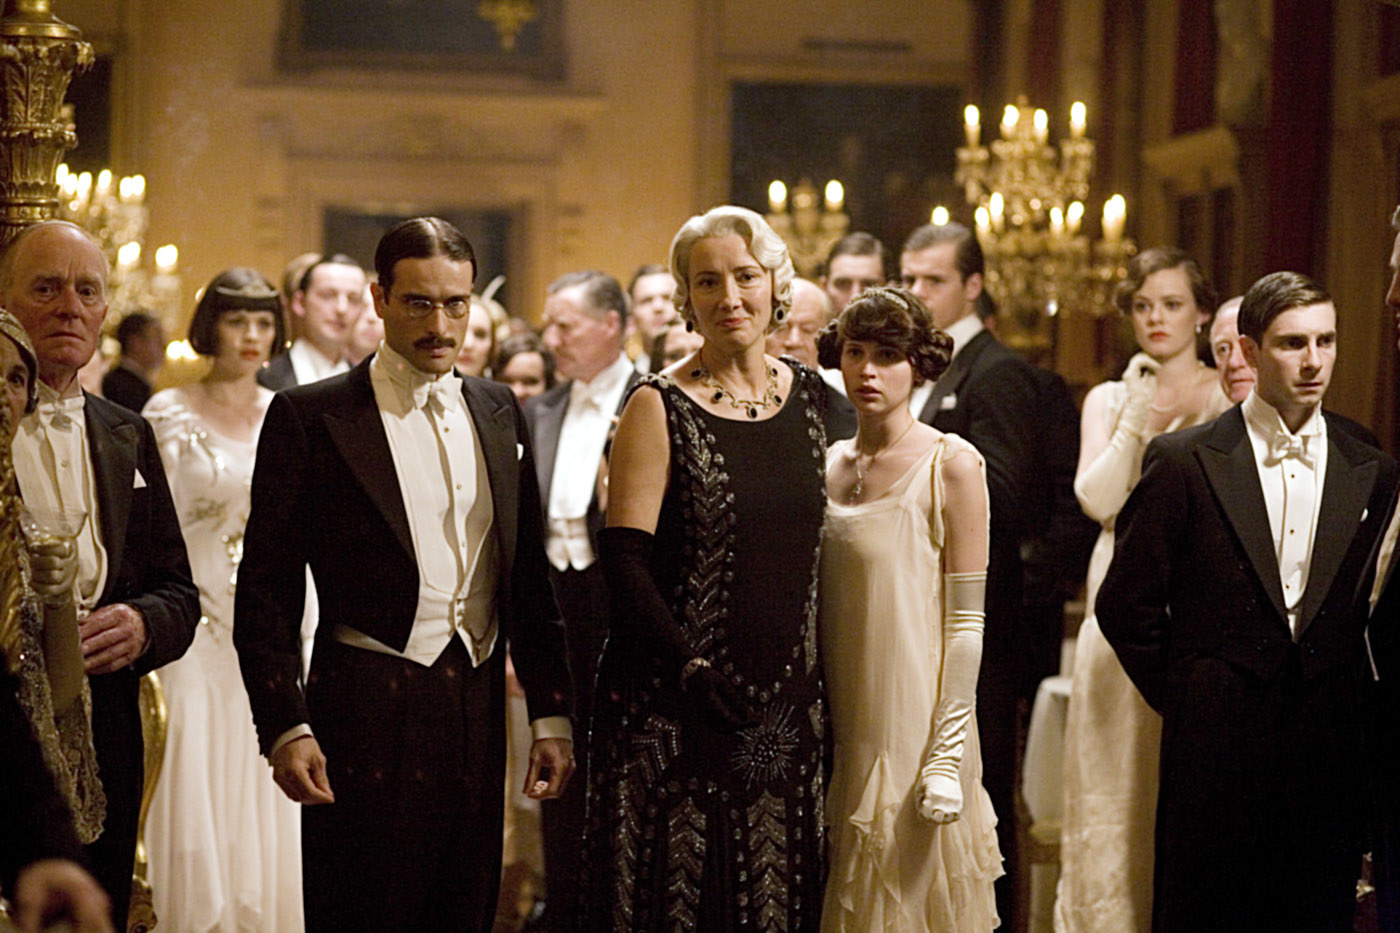 A group of people in elaborate formalwear at a ball, with Thompson in center